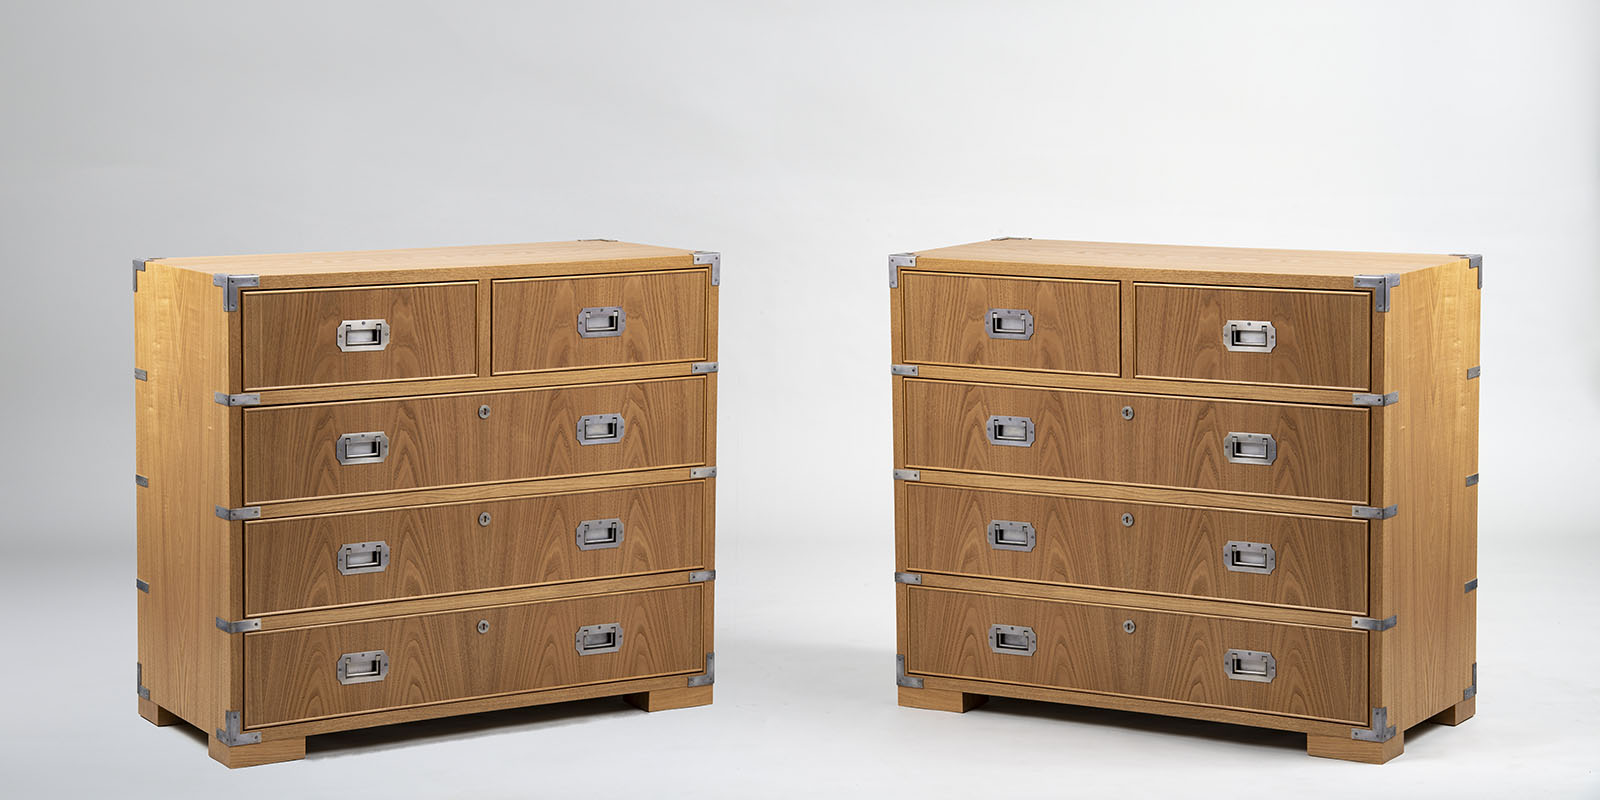 A Pair of Modernist Chests by ILIAD Design